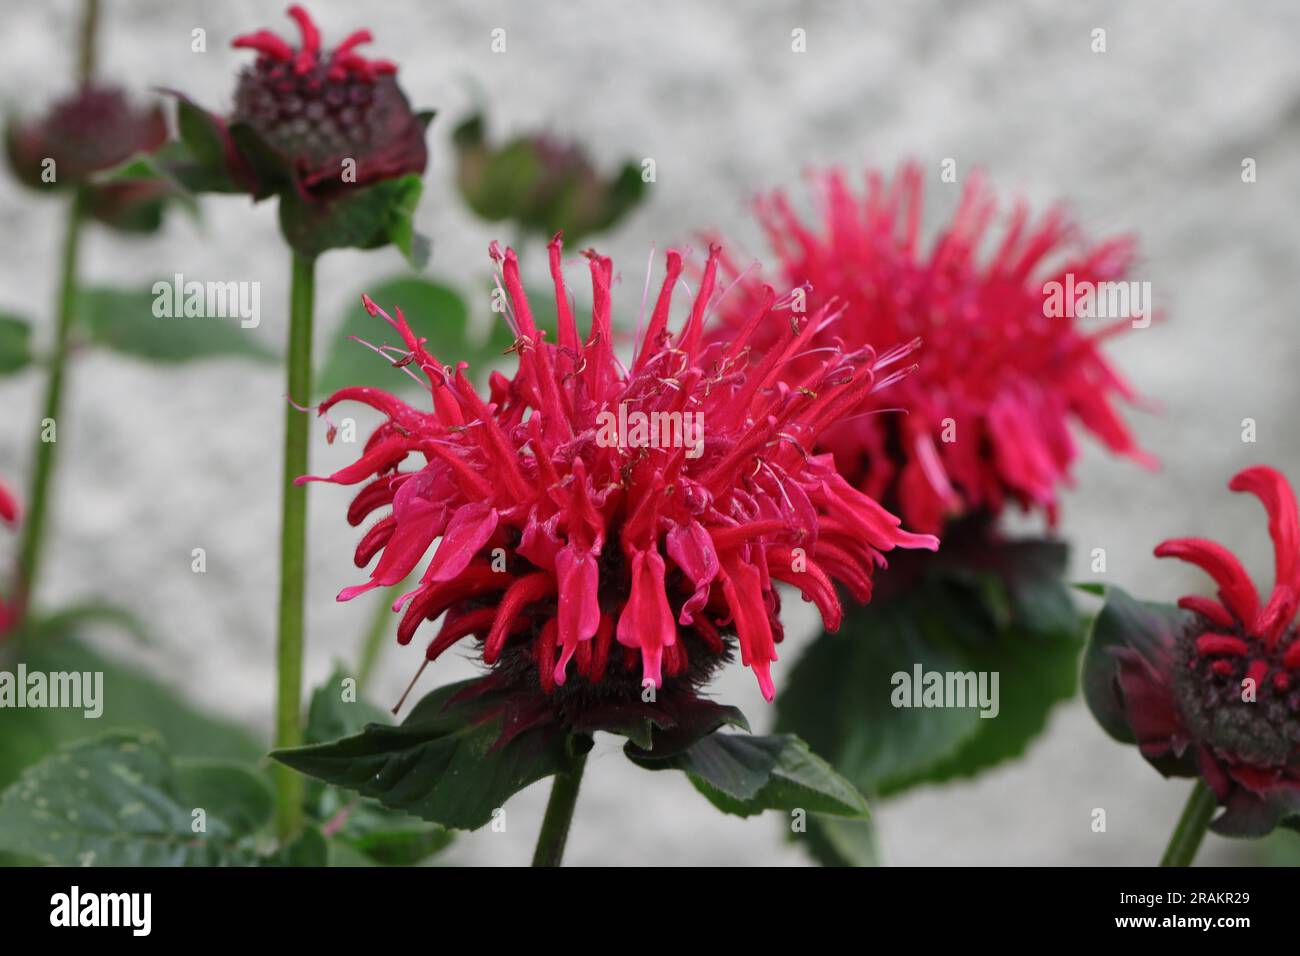 Close-up of a beautiful scarlet Monarda didyma flower in front of a white house wall, blurred background, side view Stock Photo